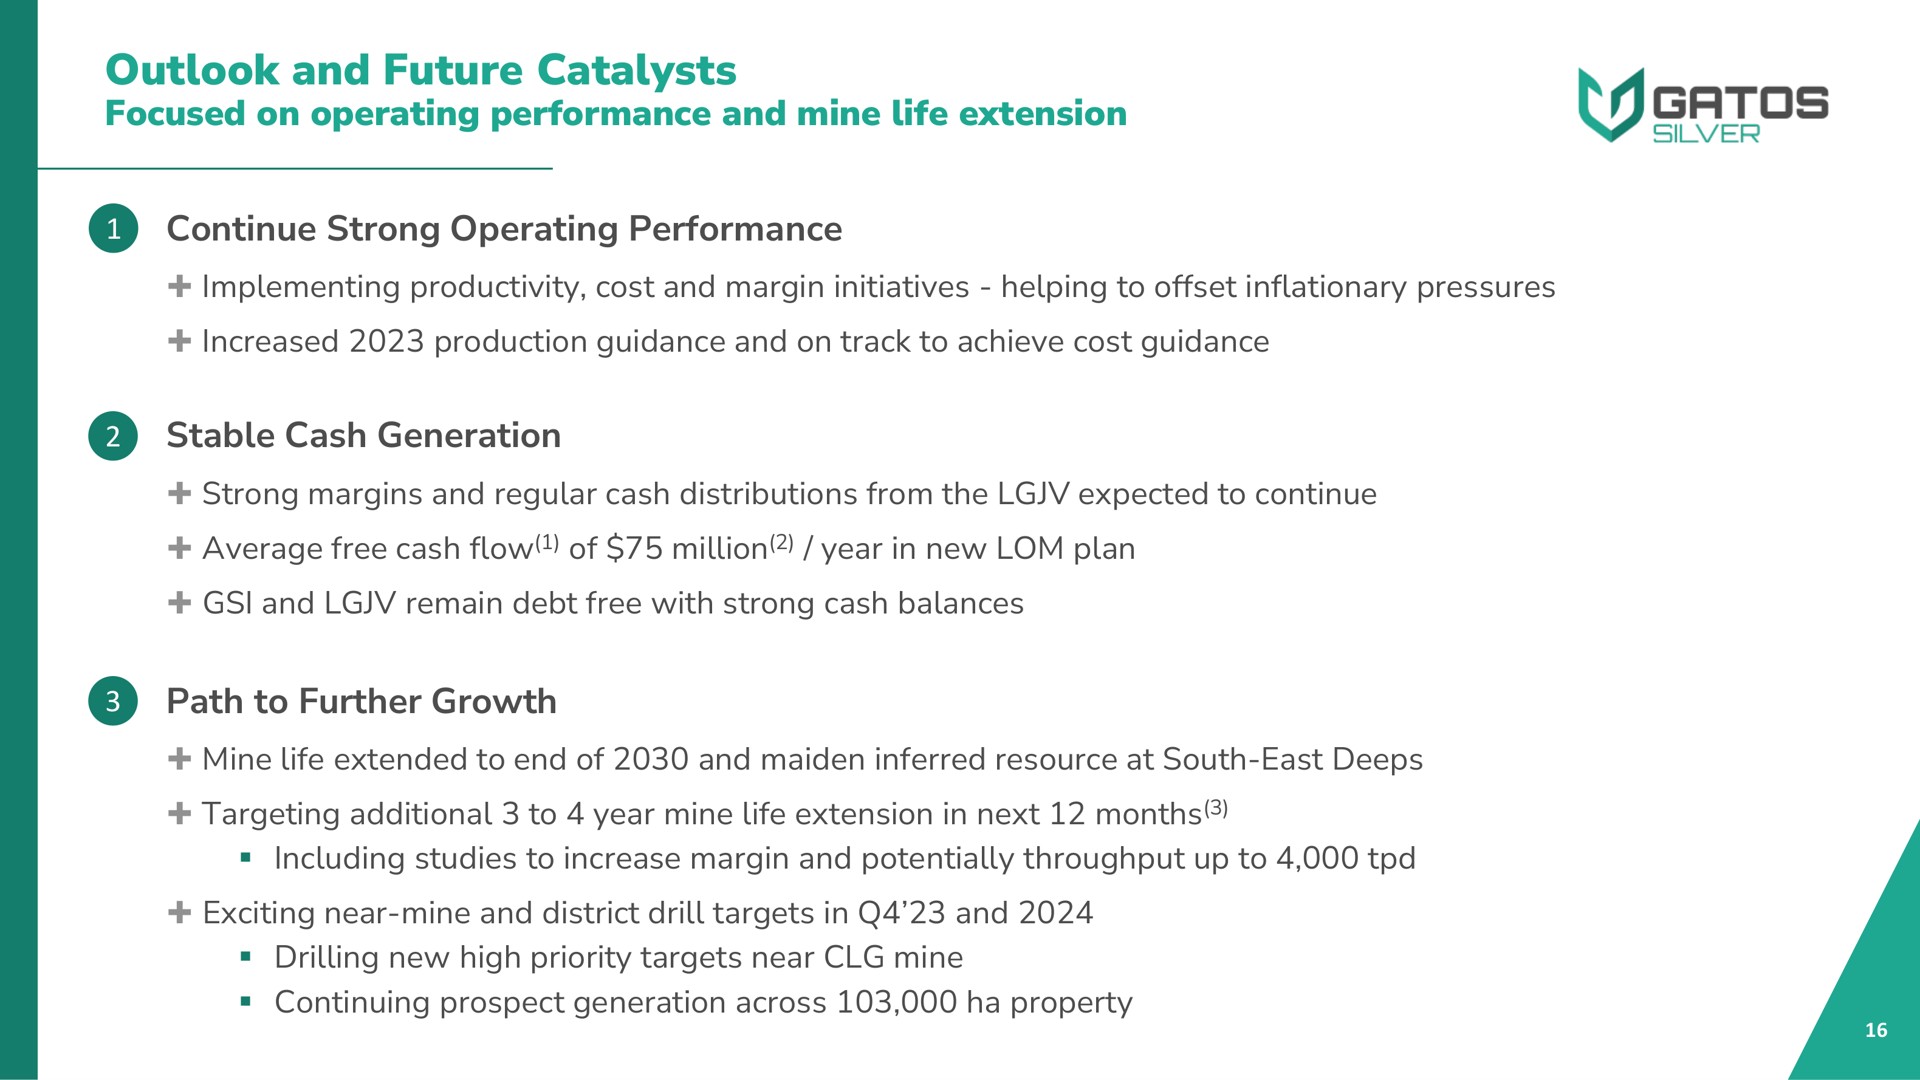 outlook and future catalysts focused on operating performance and mine life extension continue strong operating performance stable cash generation path to further growth | Gatos Silver